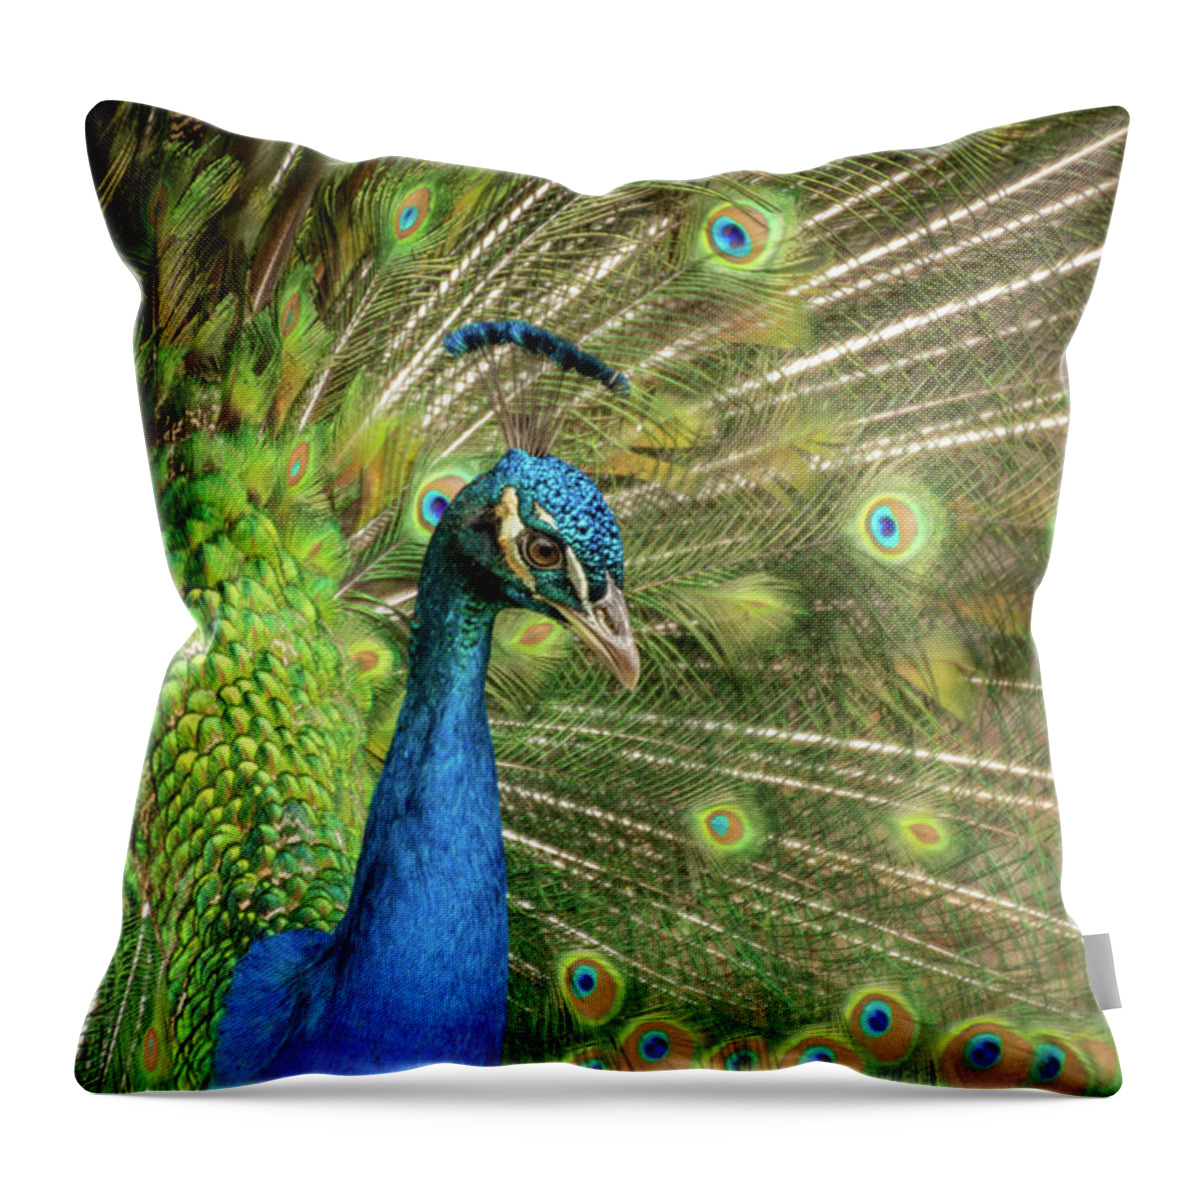 Peacock Throw Pillow featuring the photograph Peacock 4 by Cindy Robinson